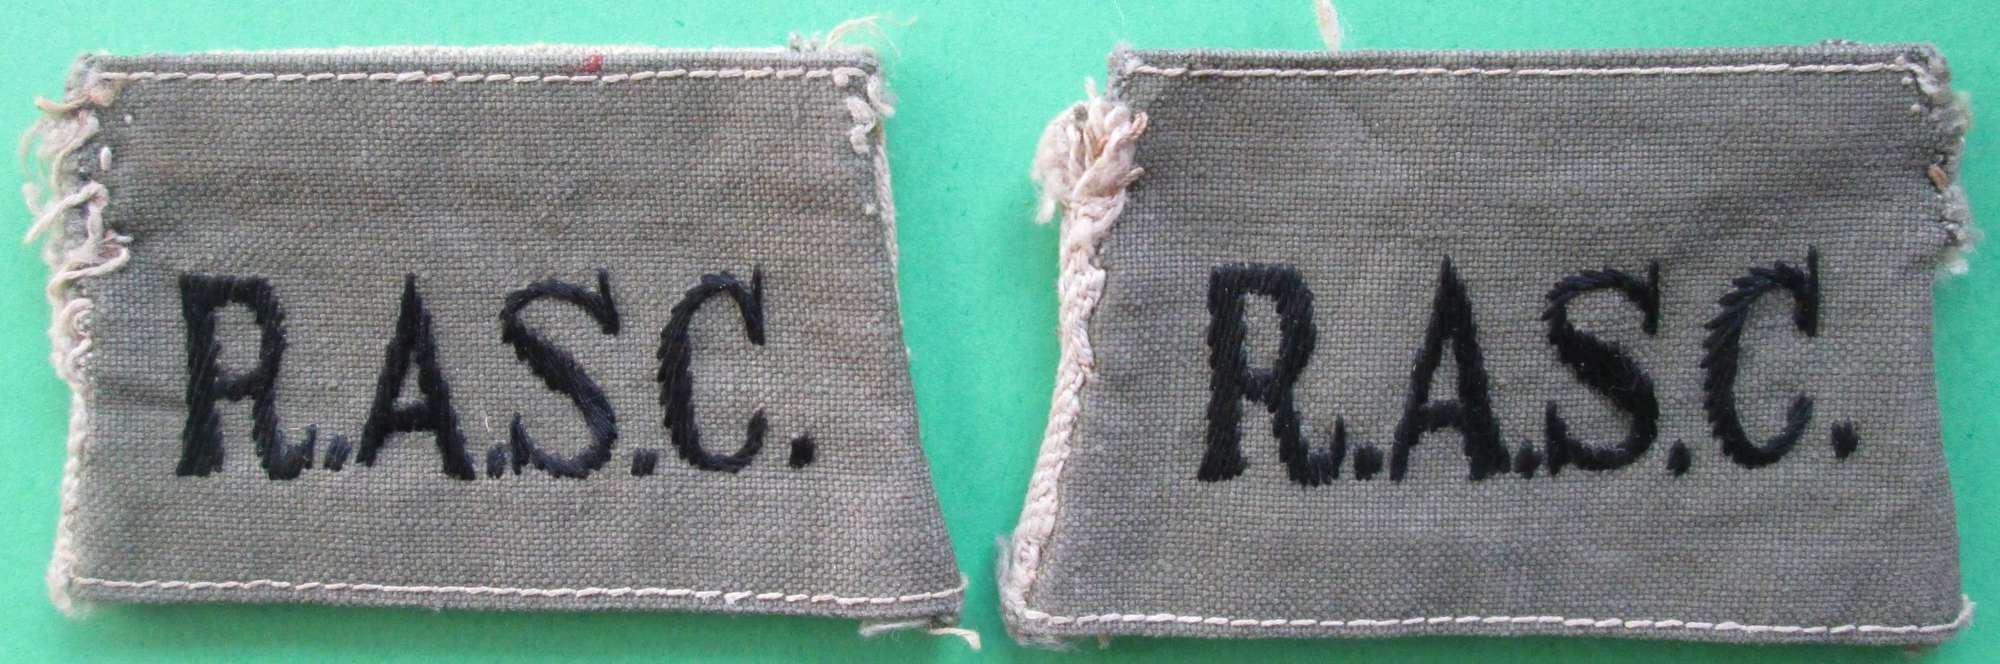 A PAIR OF ROYAL ARMY SERVICE CORPS SLIP ON TITLES